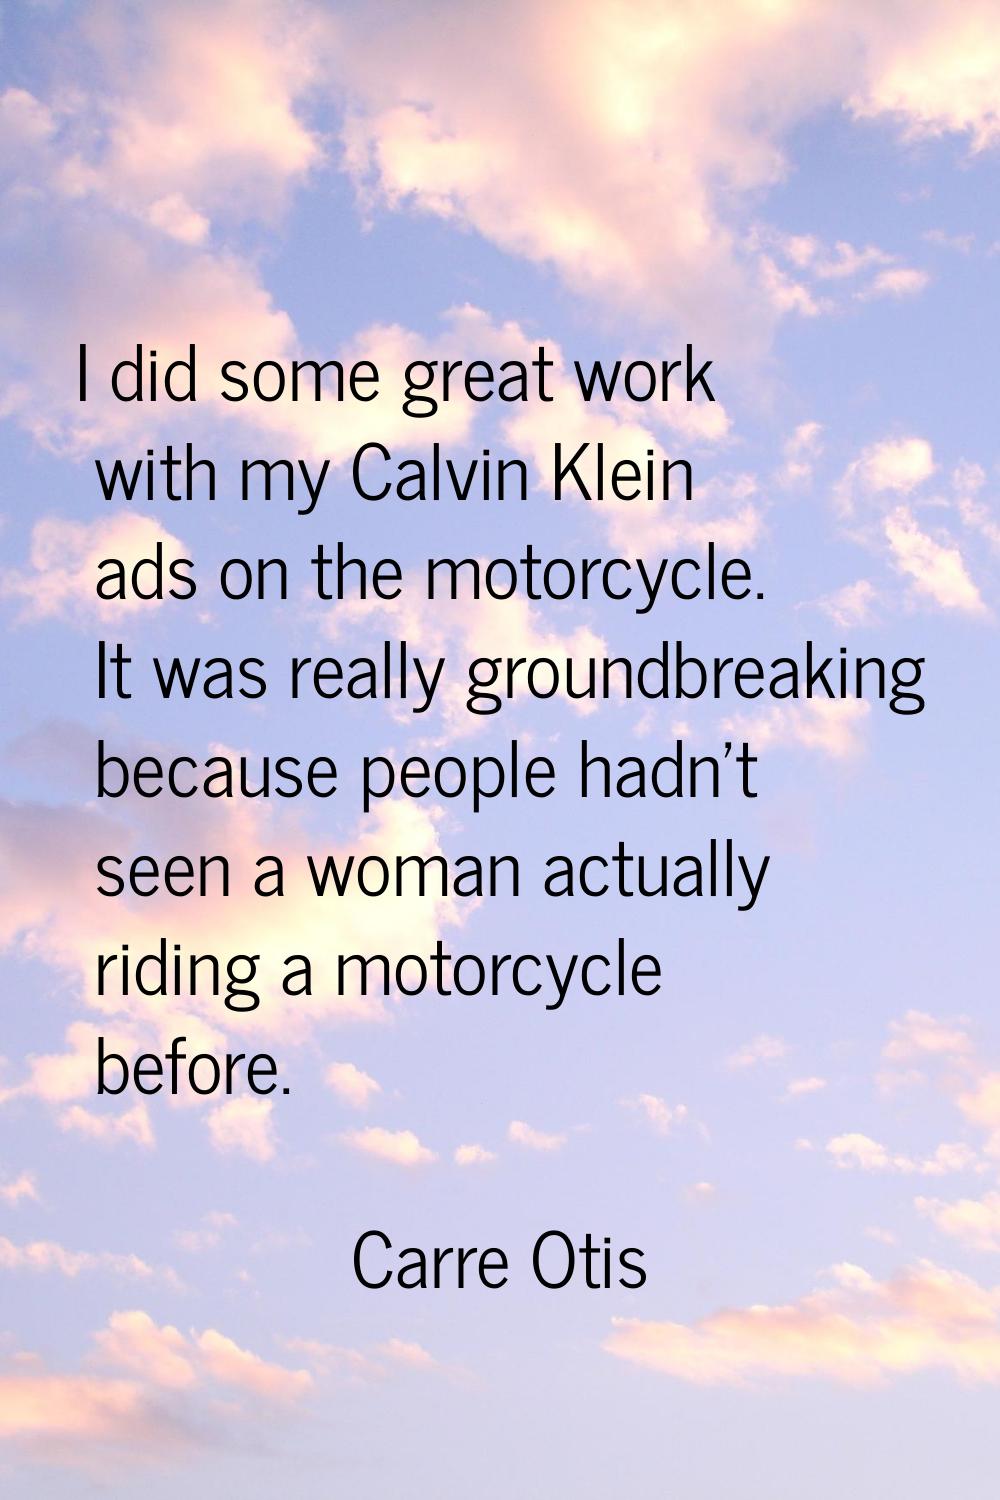 I did some great work with my Calvin Klein ads on the motorcycle. It was really groundbreaking beca